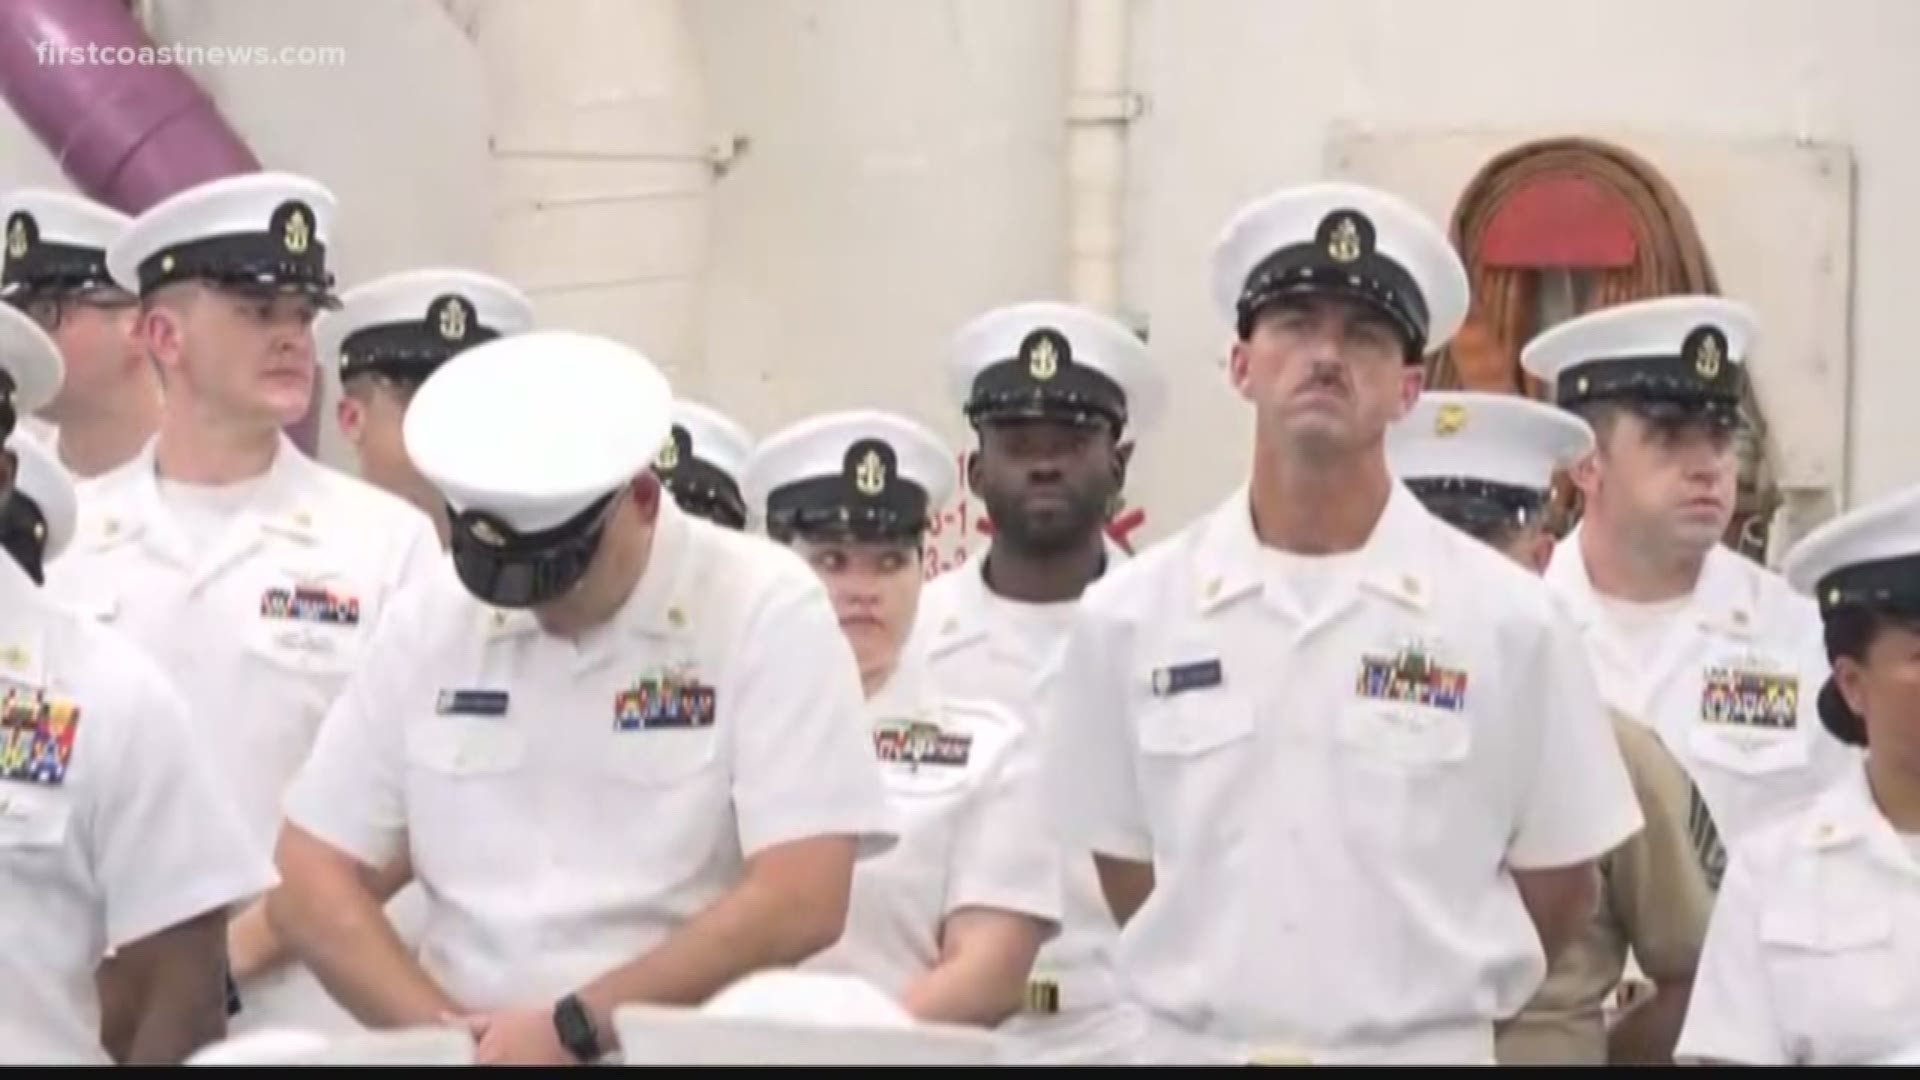 Sailors aboard the USS New York pay their respects every year to those who died in the terror attacks of Sept. 11, 2001. The plan for Tuesday is to perform the ceremony at Naval Station Mayport, the home base for the San Antonio-class amphibious transport